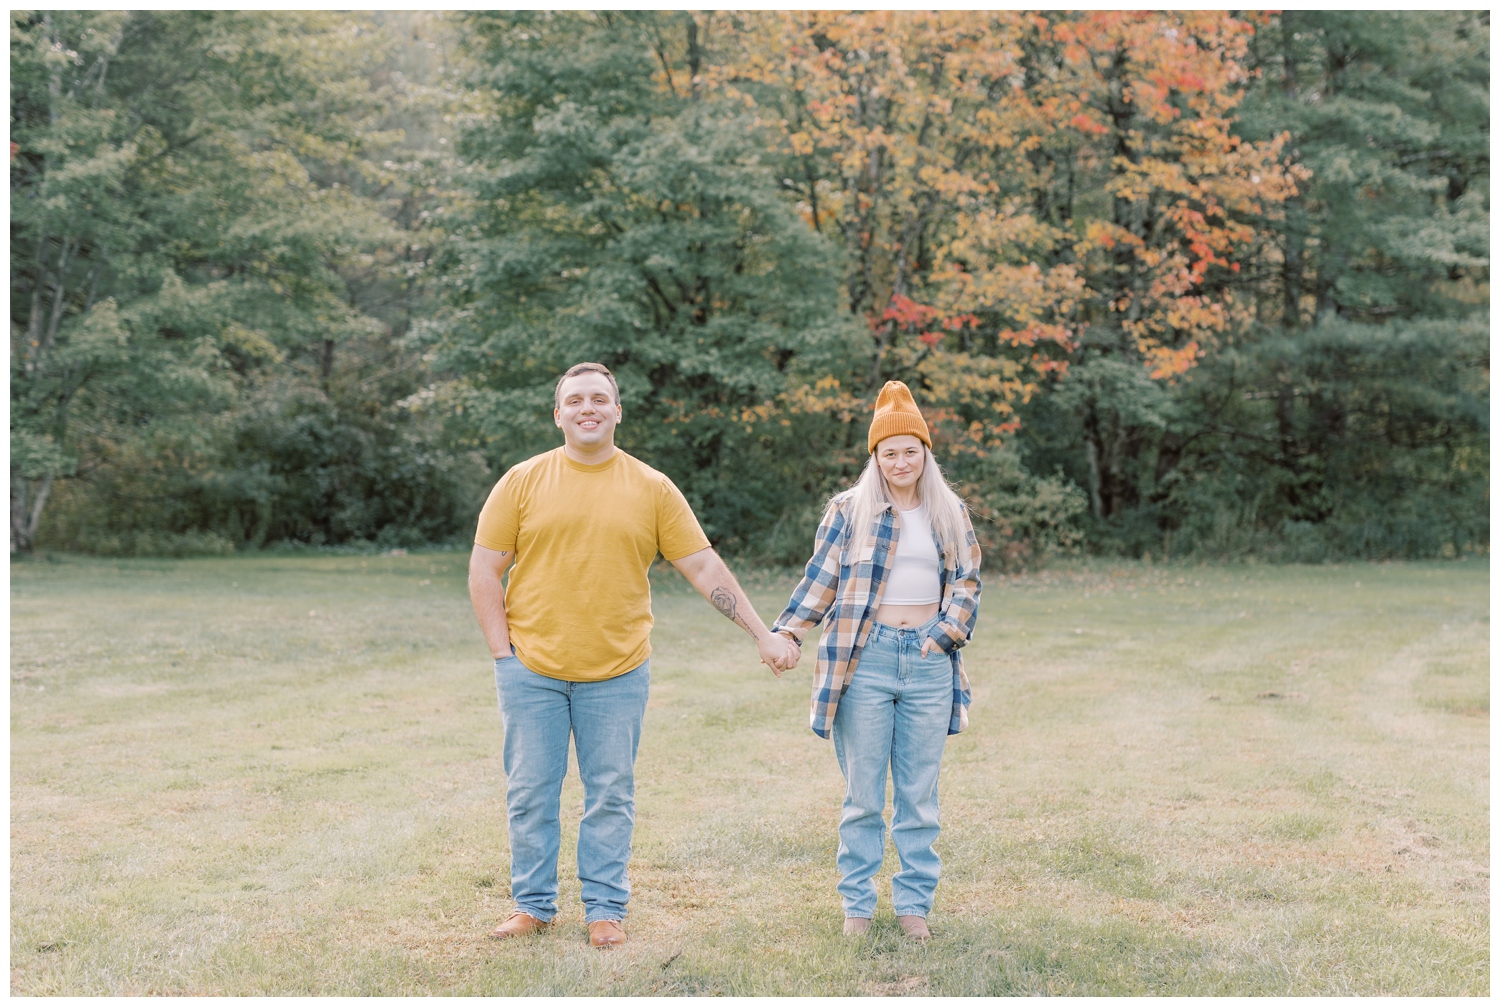 Couple holding hands and looking into the camera during their fall themed engagement session at Shenantaha Creek Park in Ballston Spa, NY.